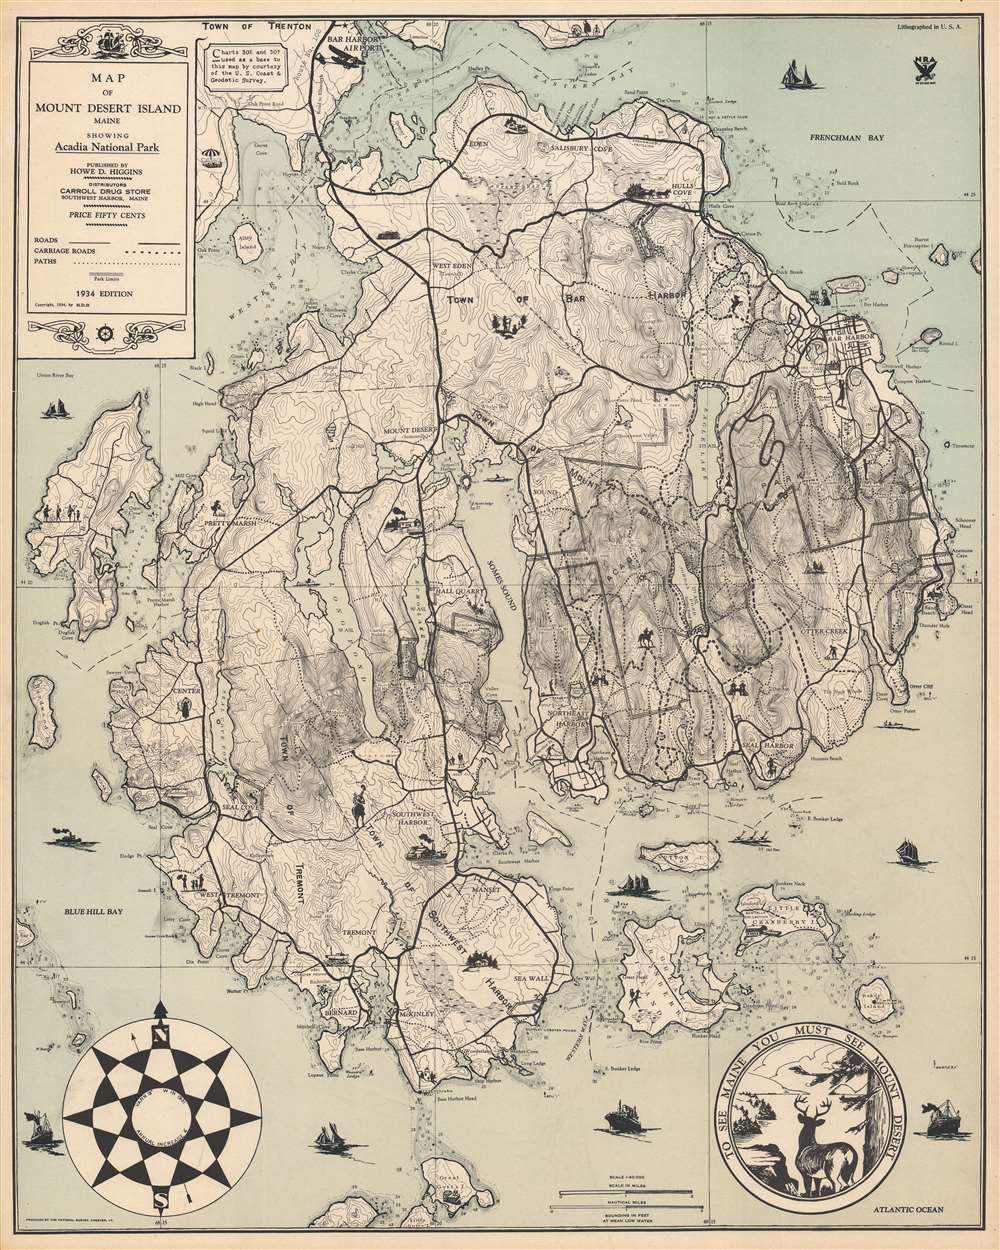 Map of Mount Desert Island Maine Showing Acadia National Park. - Main View